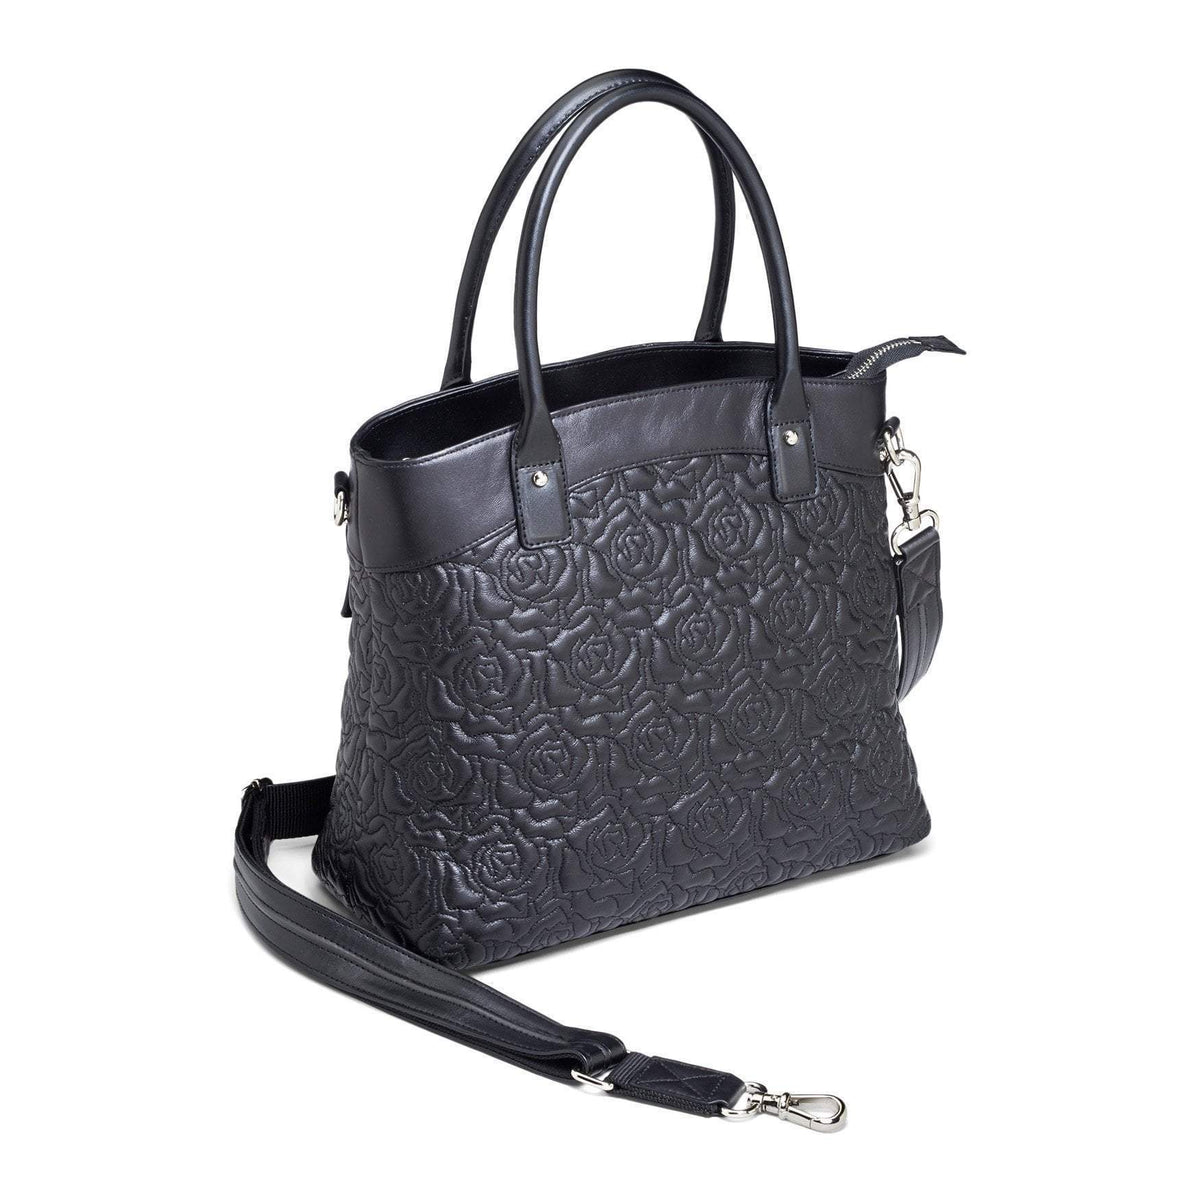 Concealed-Carry Purse | Lambskin Rose Tote GTM-61 | GunGoddess ...